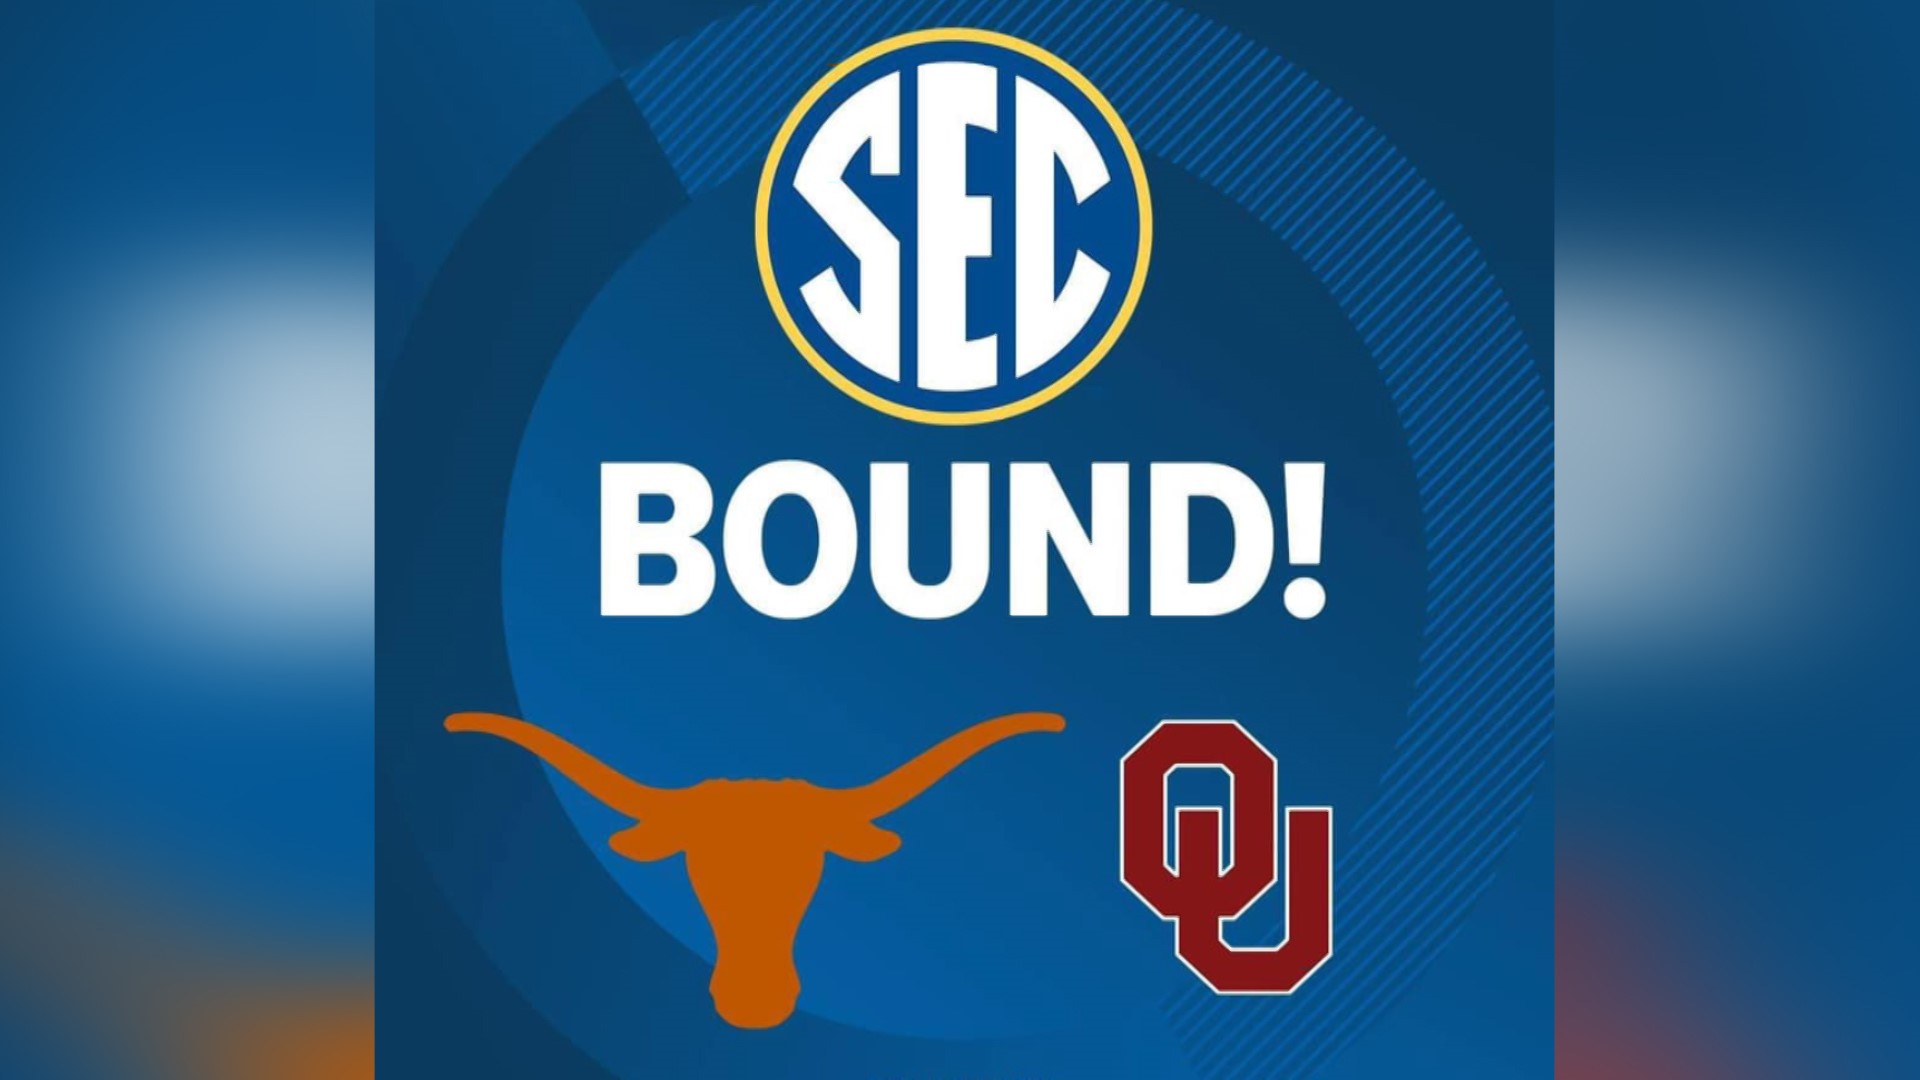 Texas & Oklahoma will join the SEC in 2025